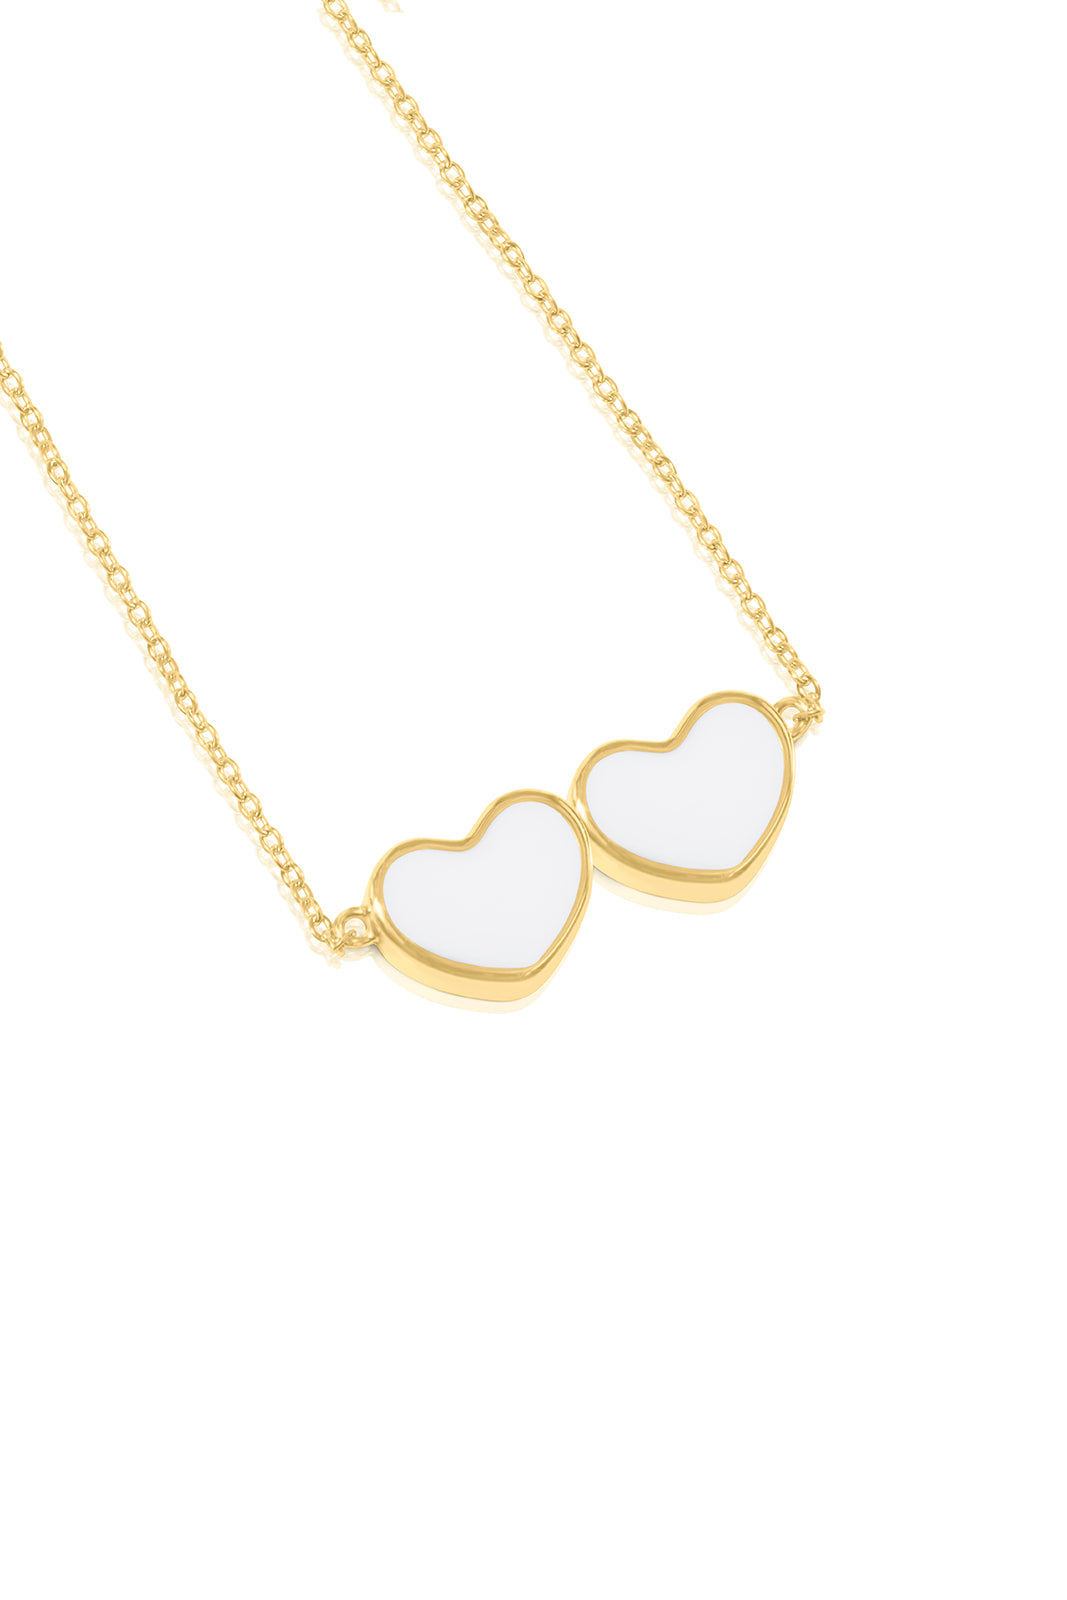 Heart strings necklace - Gold